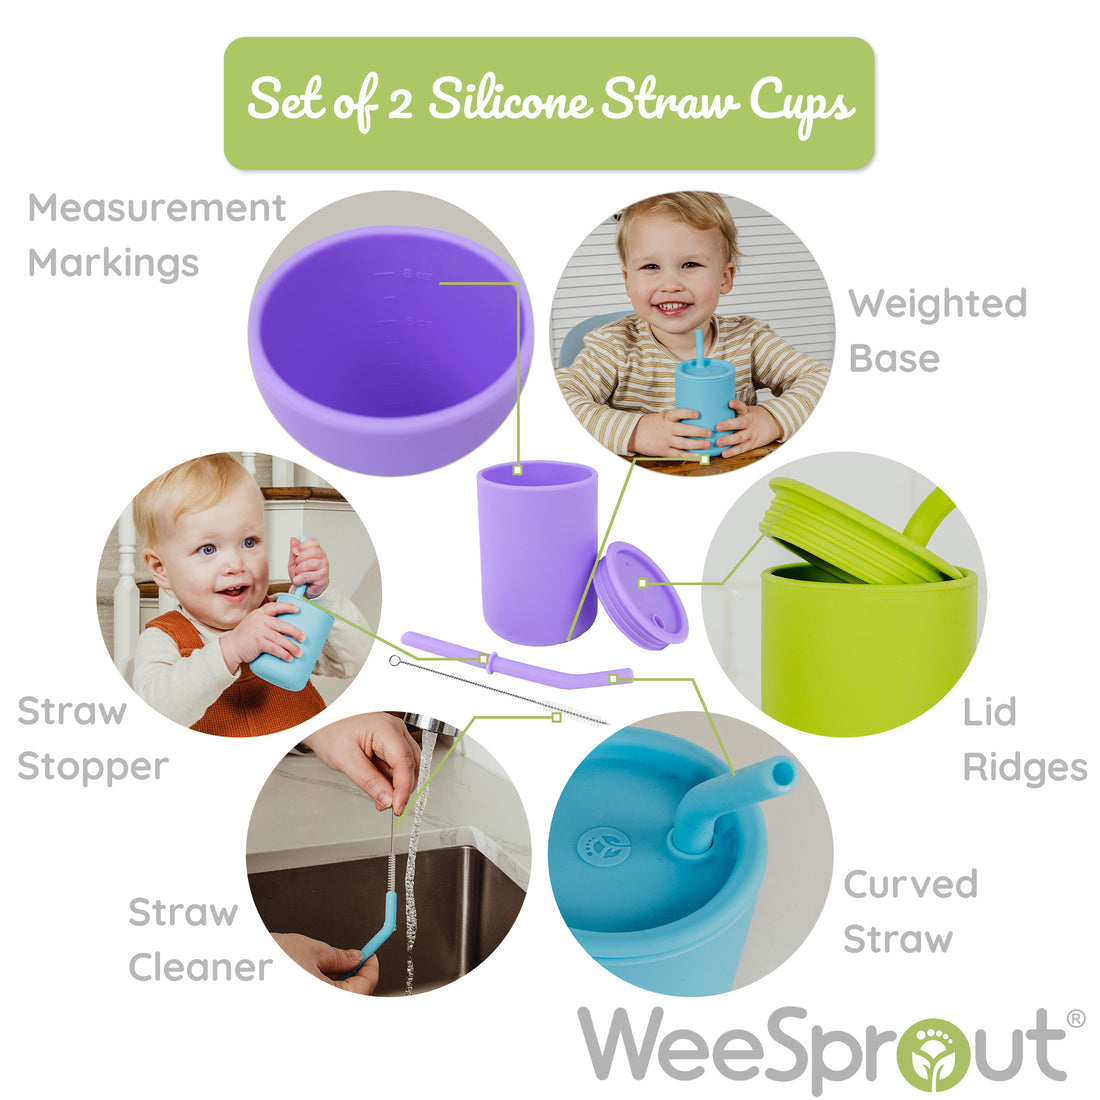 Infographic chart of silicone straw cup used with straw cleaner, curved straw, lid ridges, and weighted base.